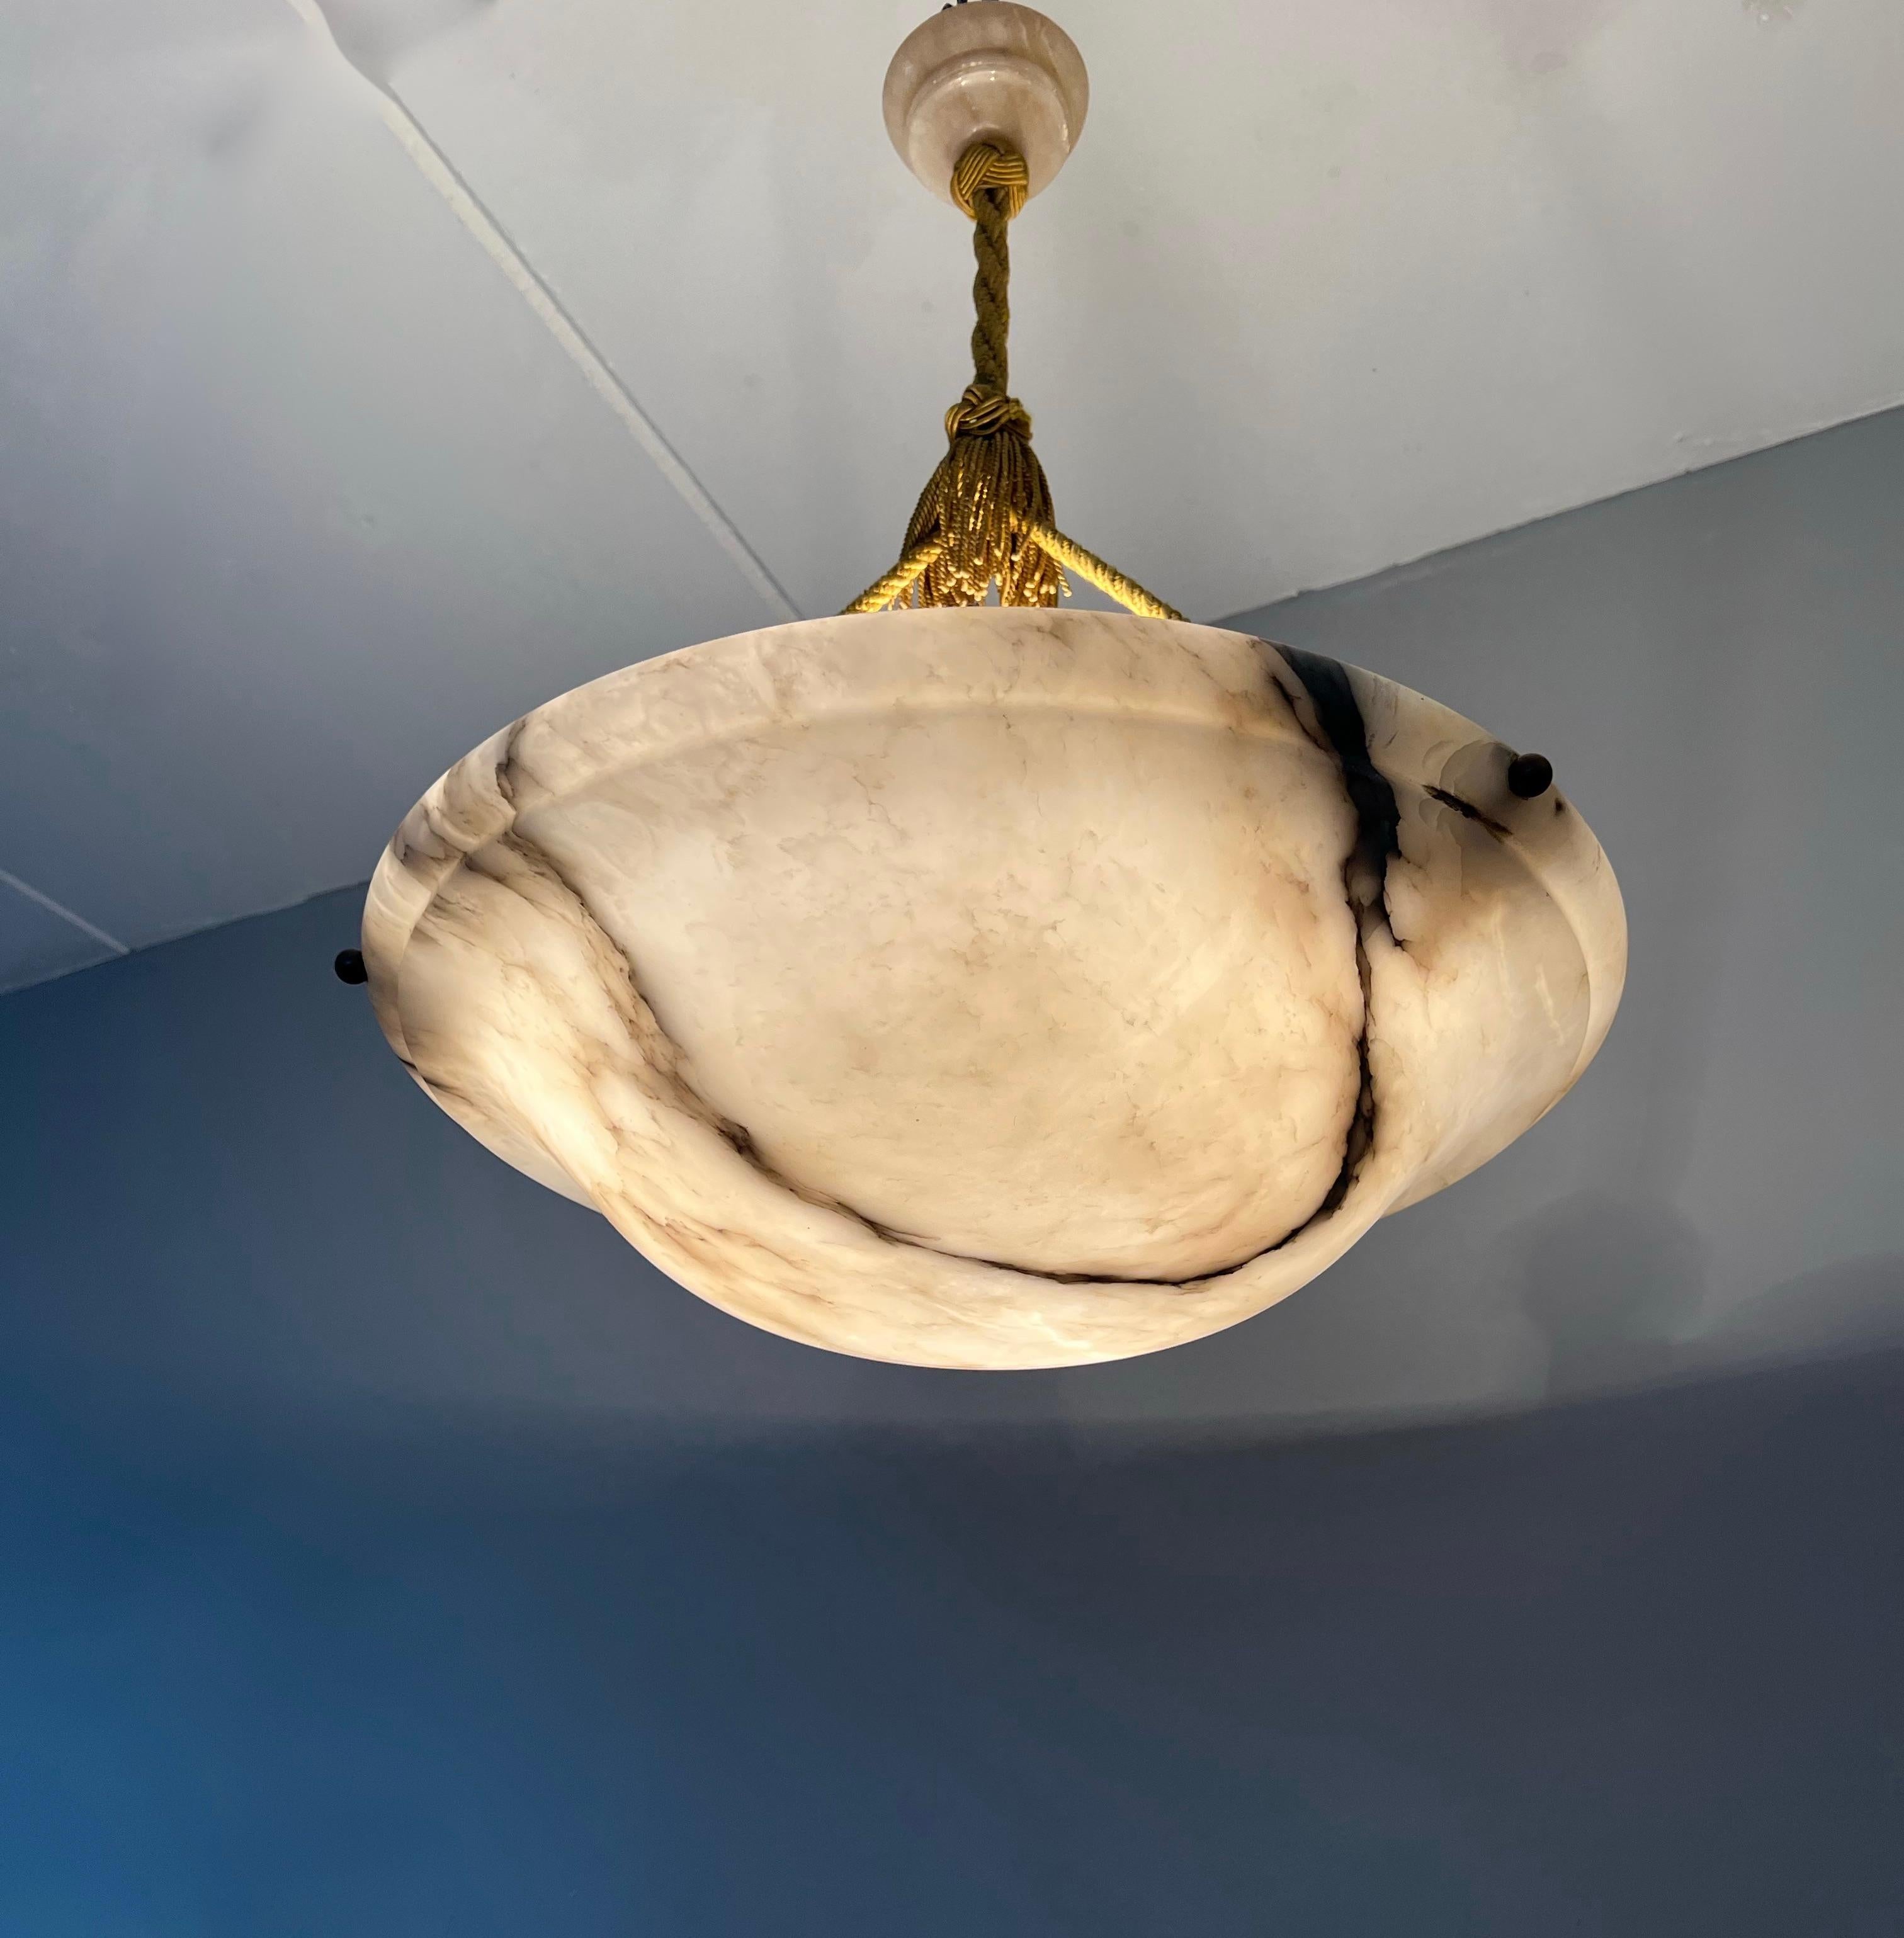 Top class antique pendant with a striking alabaster shade of 21.8 inches in diameter.

Thanks to its large size and excellent condition this timeless alabaster chandelier is bound to light up someones days and evenings soon. Because of their natural